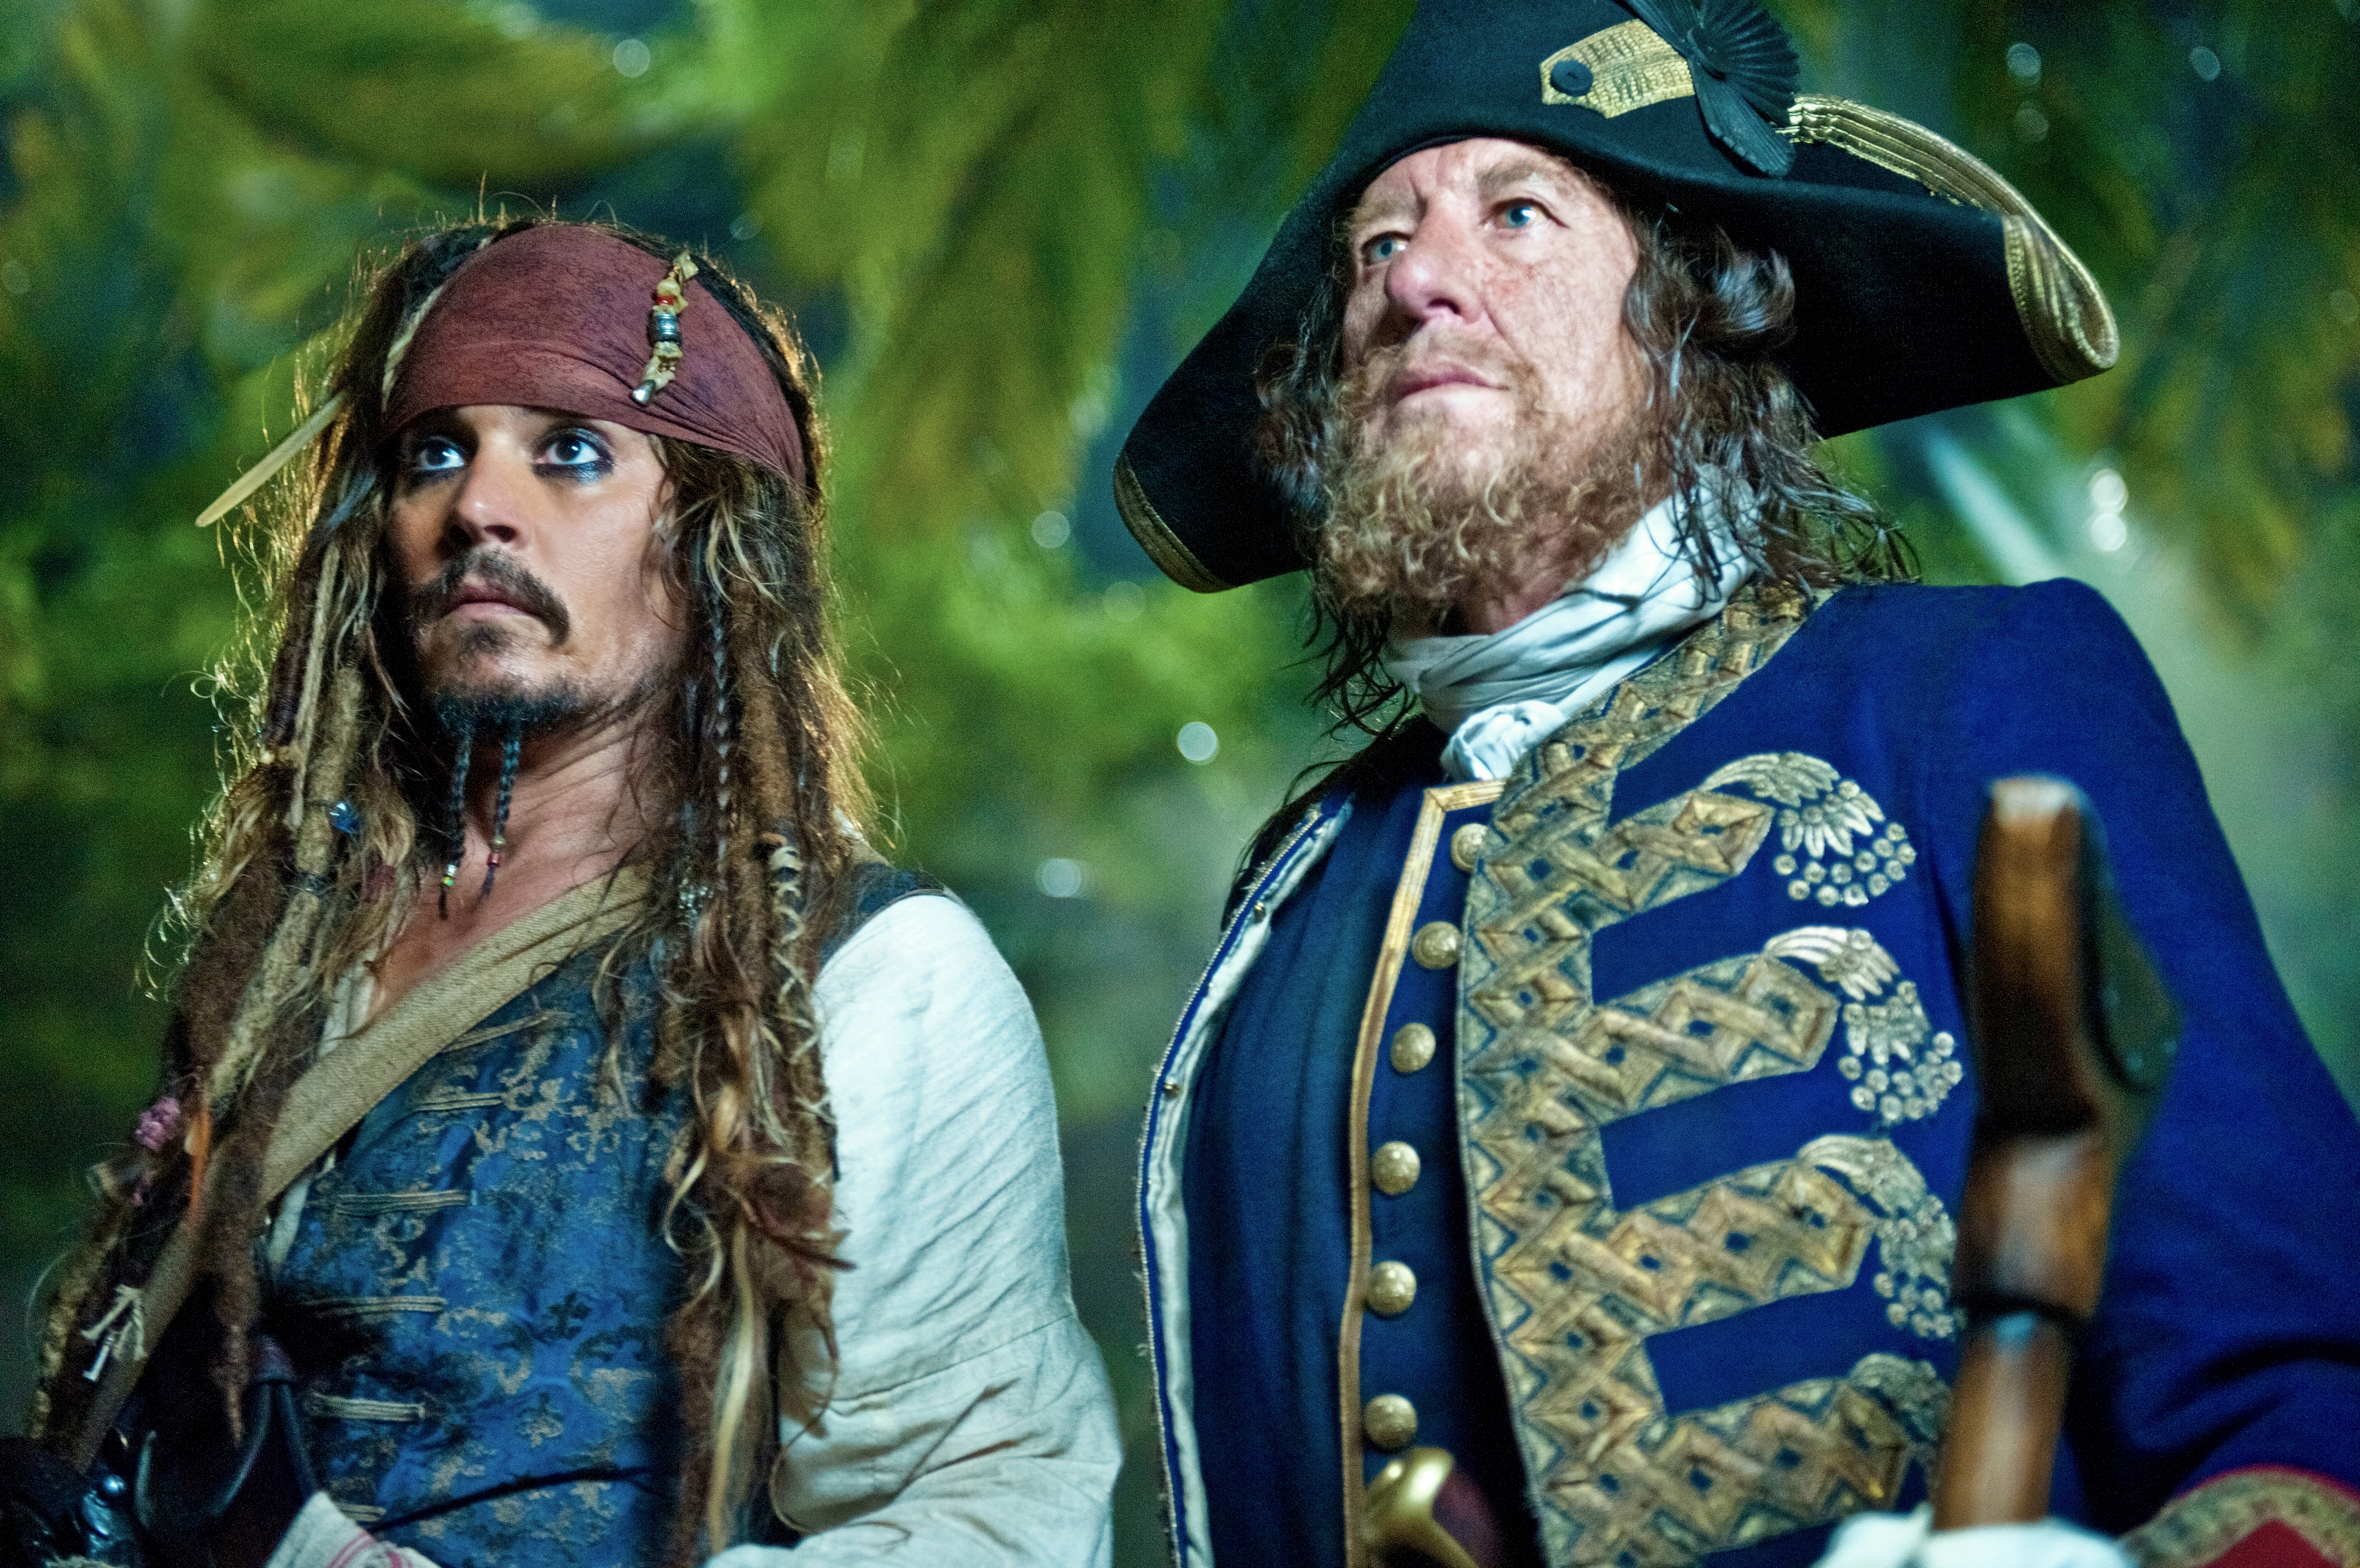 movie, pirates of the caribbean: on stranger tides, geoffrey rush, hector barbossa, jack sparrow, johnny depp, pirates of the caribbean